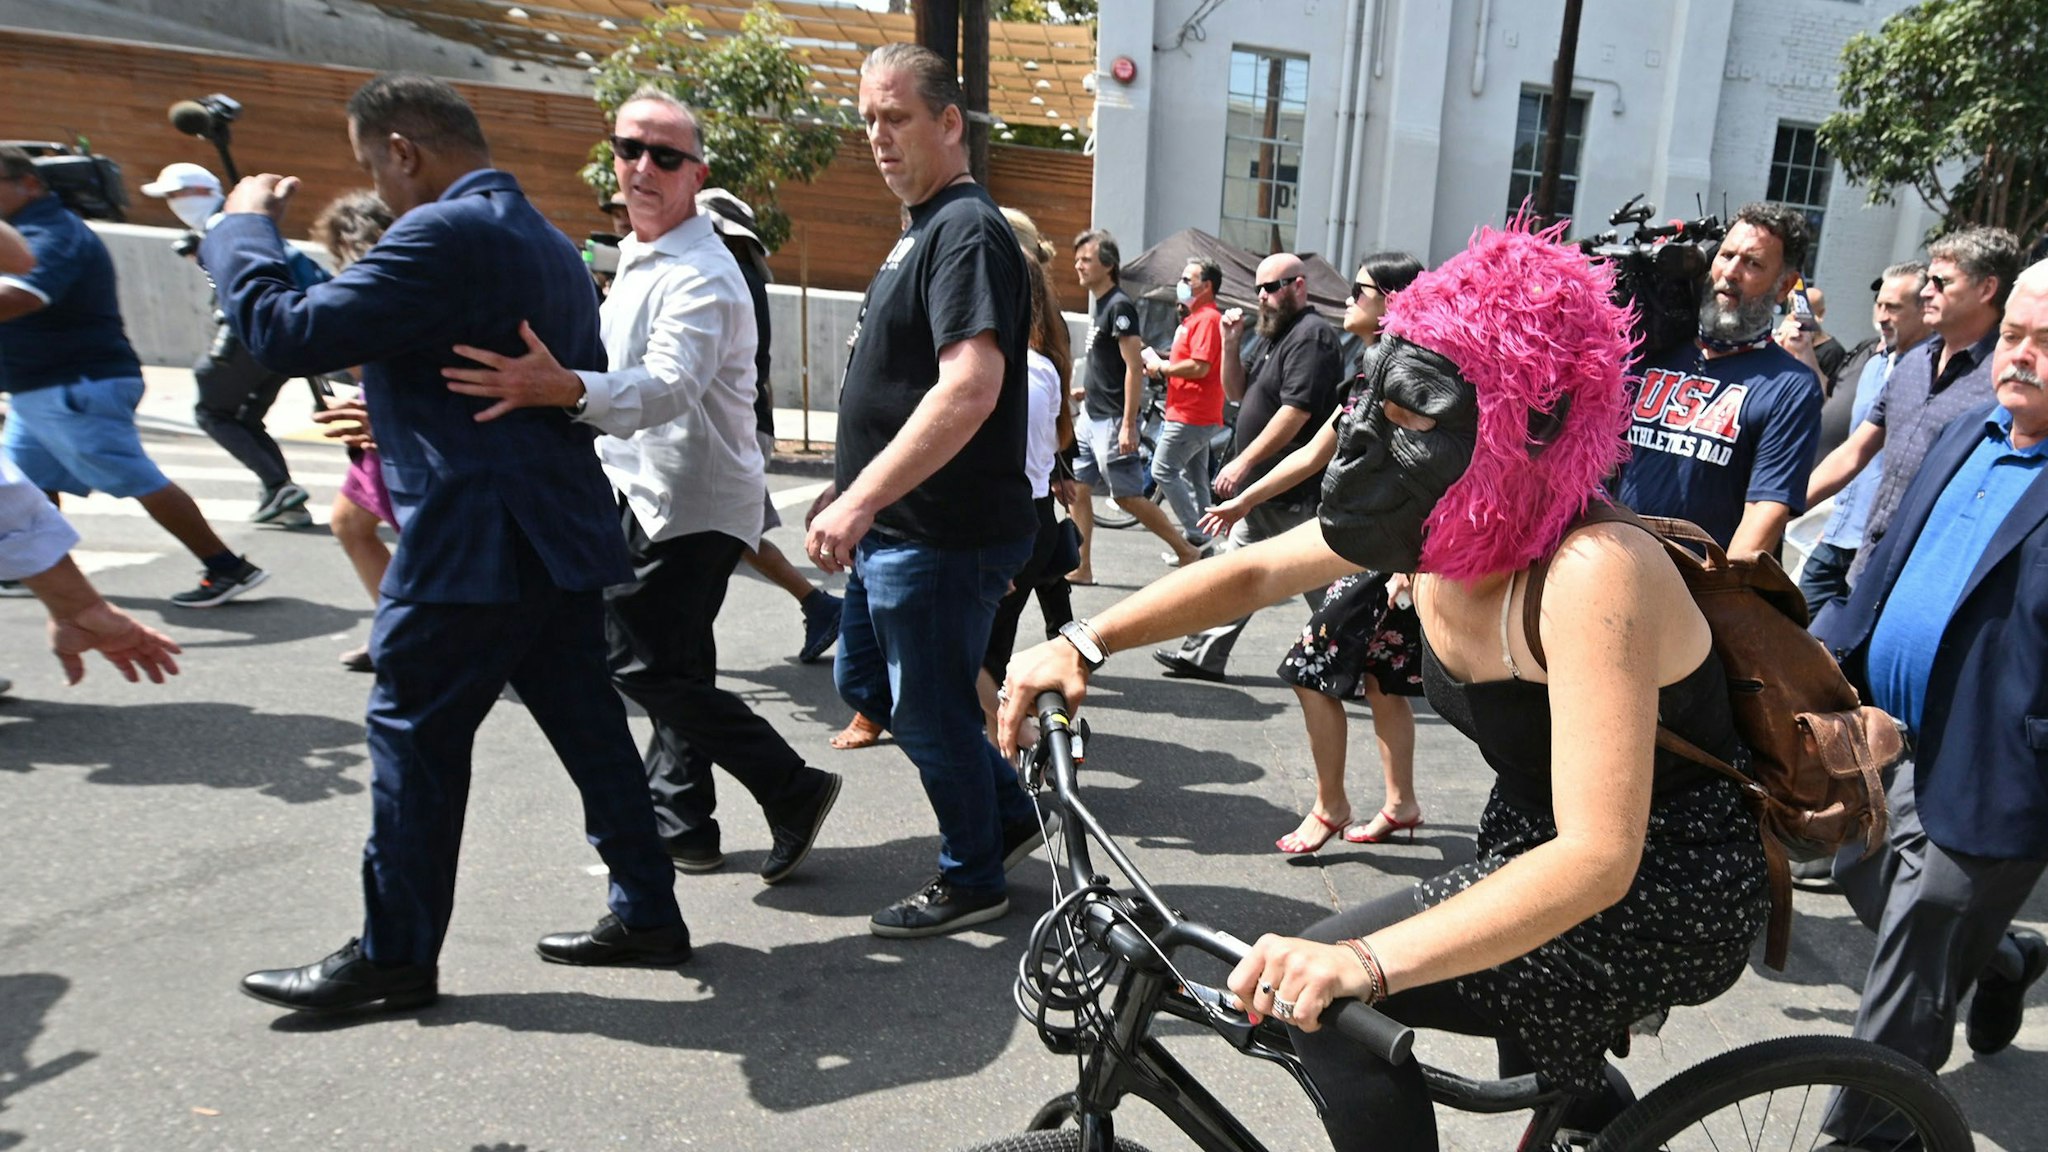 A woman wearing a guerilla mask follows conservative talk show host and gubernatorial recall candidate Larry Elder (L) (back to camera) as he walks along streets lined with tents of unhoused people, in the Venice neighborhood of Los Angeles, California, September 8, 2021 ahead of the special recall election. - The recall election, which will be held on September 14, 2021, asks voters to respond two questions: whether Governor Gavin Newsom, a Democratic, should be recalled from the office of governor, and who should succeed Newsom if he is recalled. Forty-six candidates, including nine Democrats and 24 Republicans, are looking to take Newsom's place as the governmental leader of California.